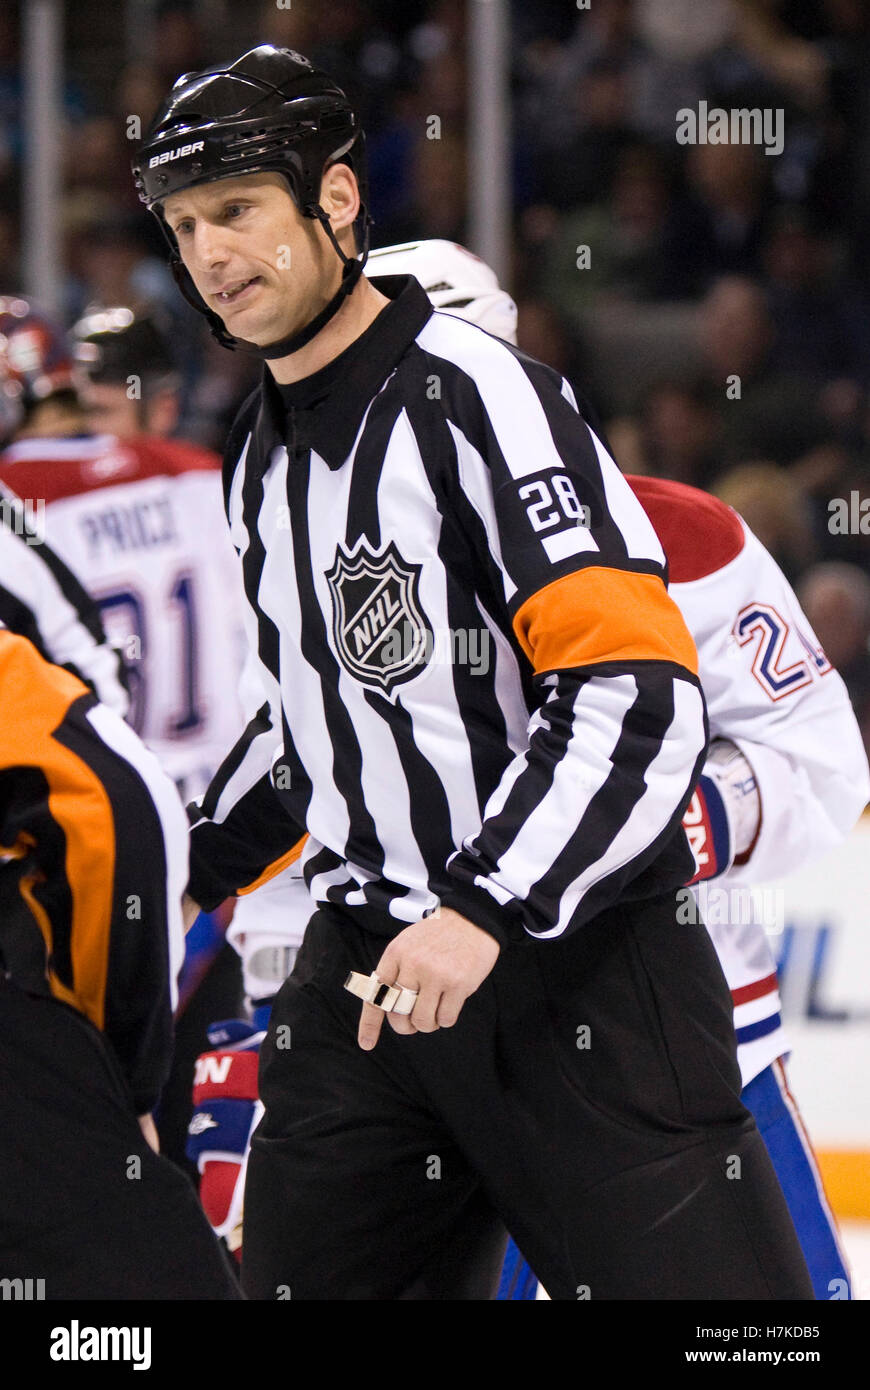 Fire NHL referee Chris Lee Petition circulating - Enough is enough 